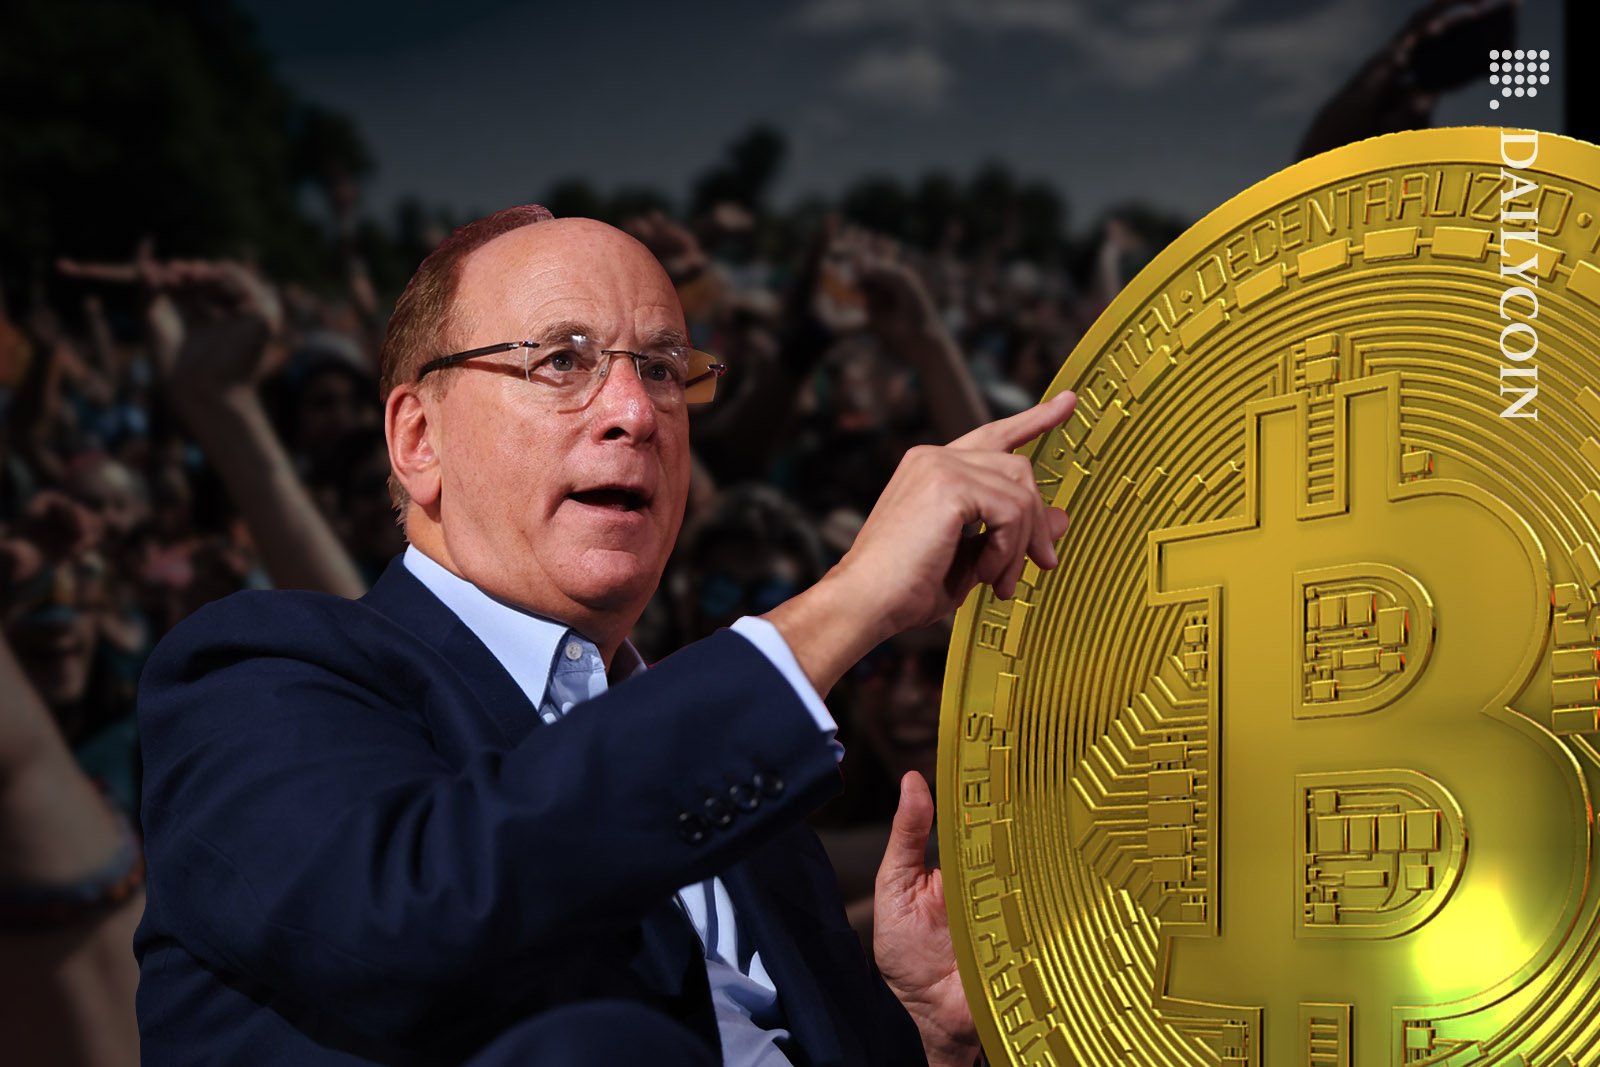 Larry Fink pointing at a large Bitcoin with a large happy croed.